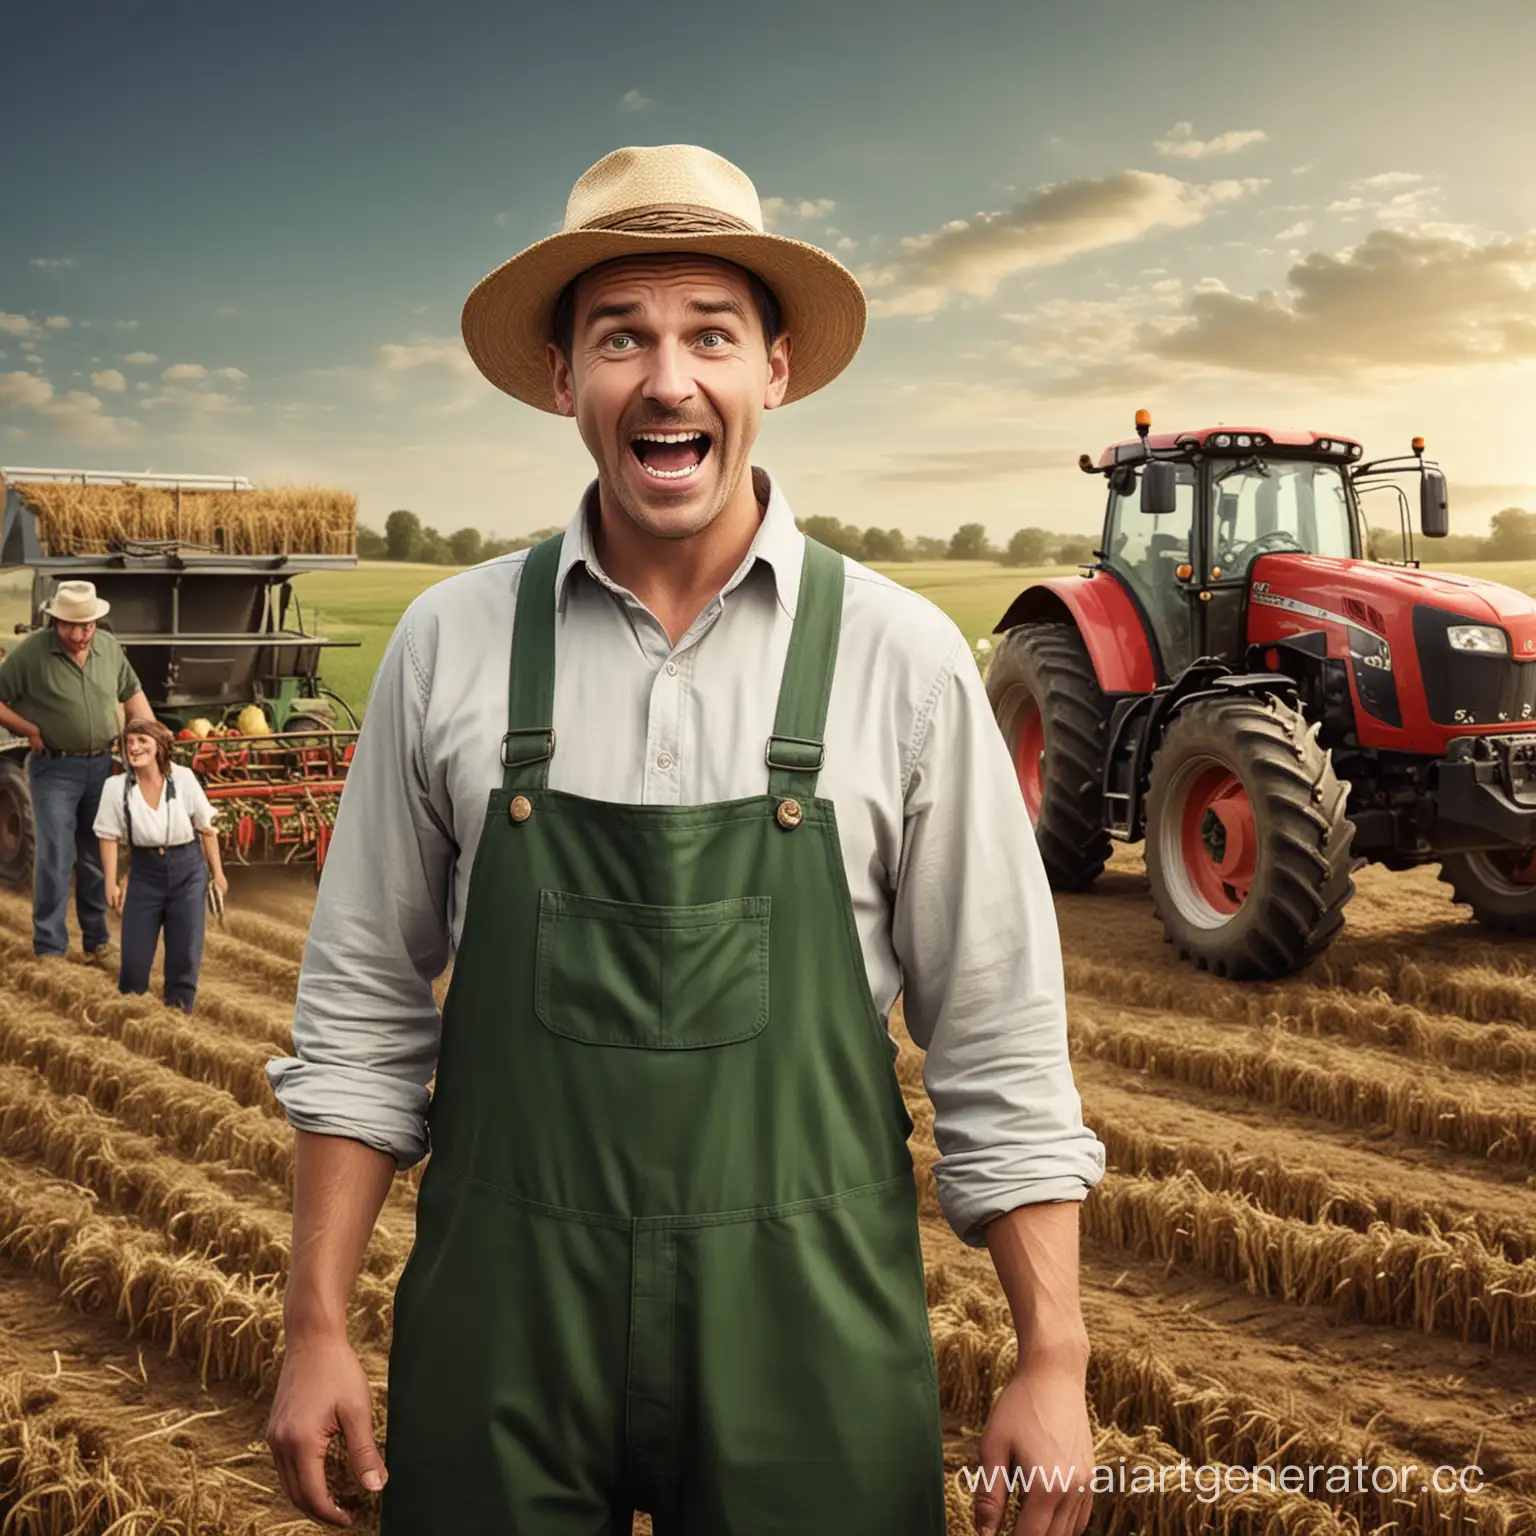 Farmers-Stir-Up-Comedy-in-Agricultural-Drama-Scene